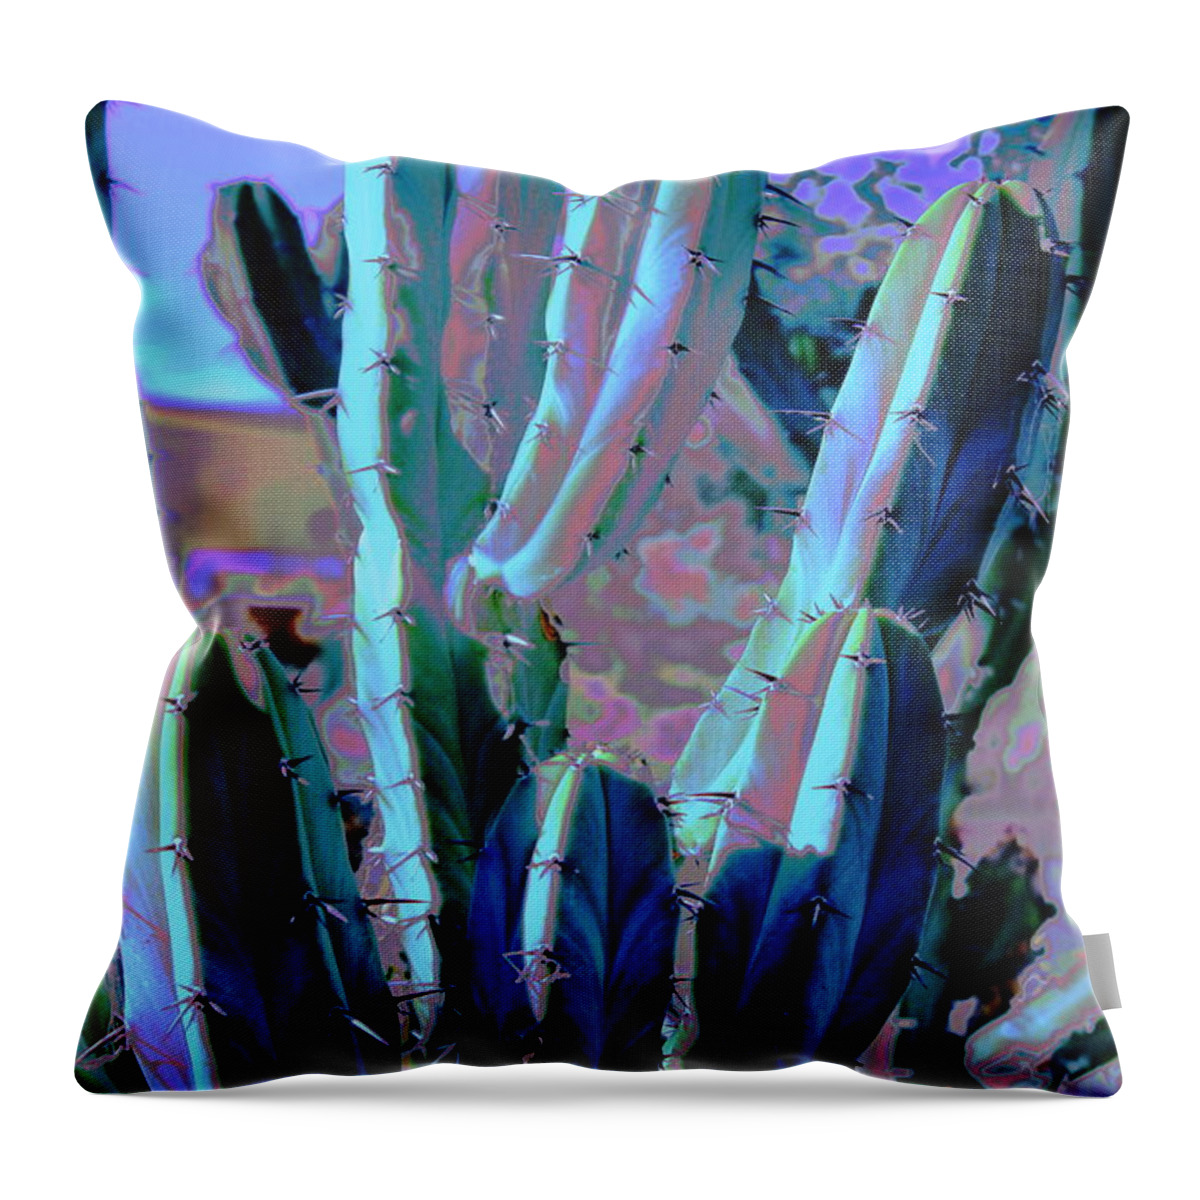 Abstract Throw Pillow featuring the photograph Blue Flame Cactus Moonglow by M Diane Bonaparte